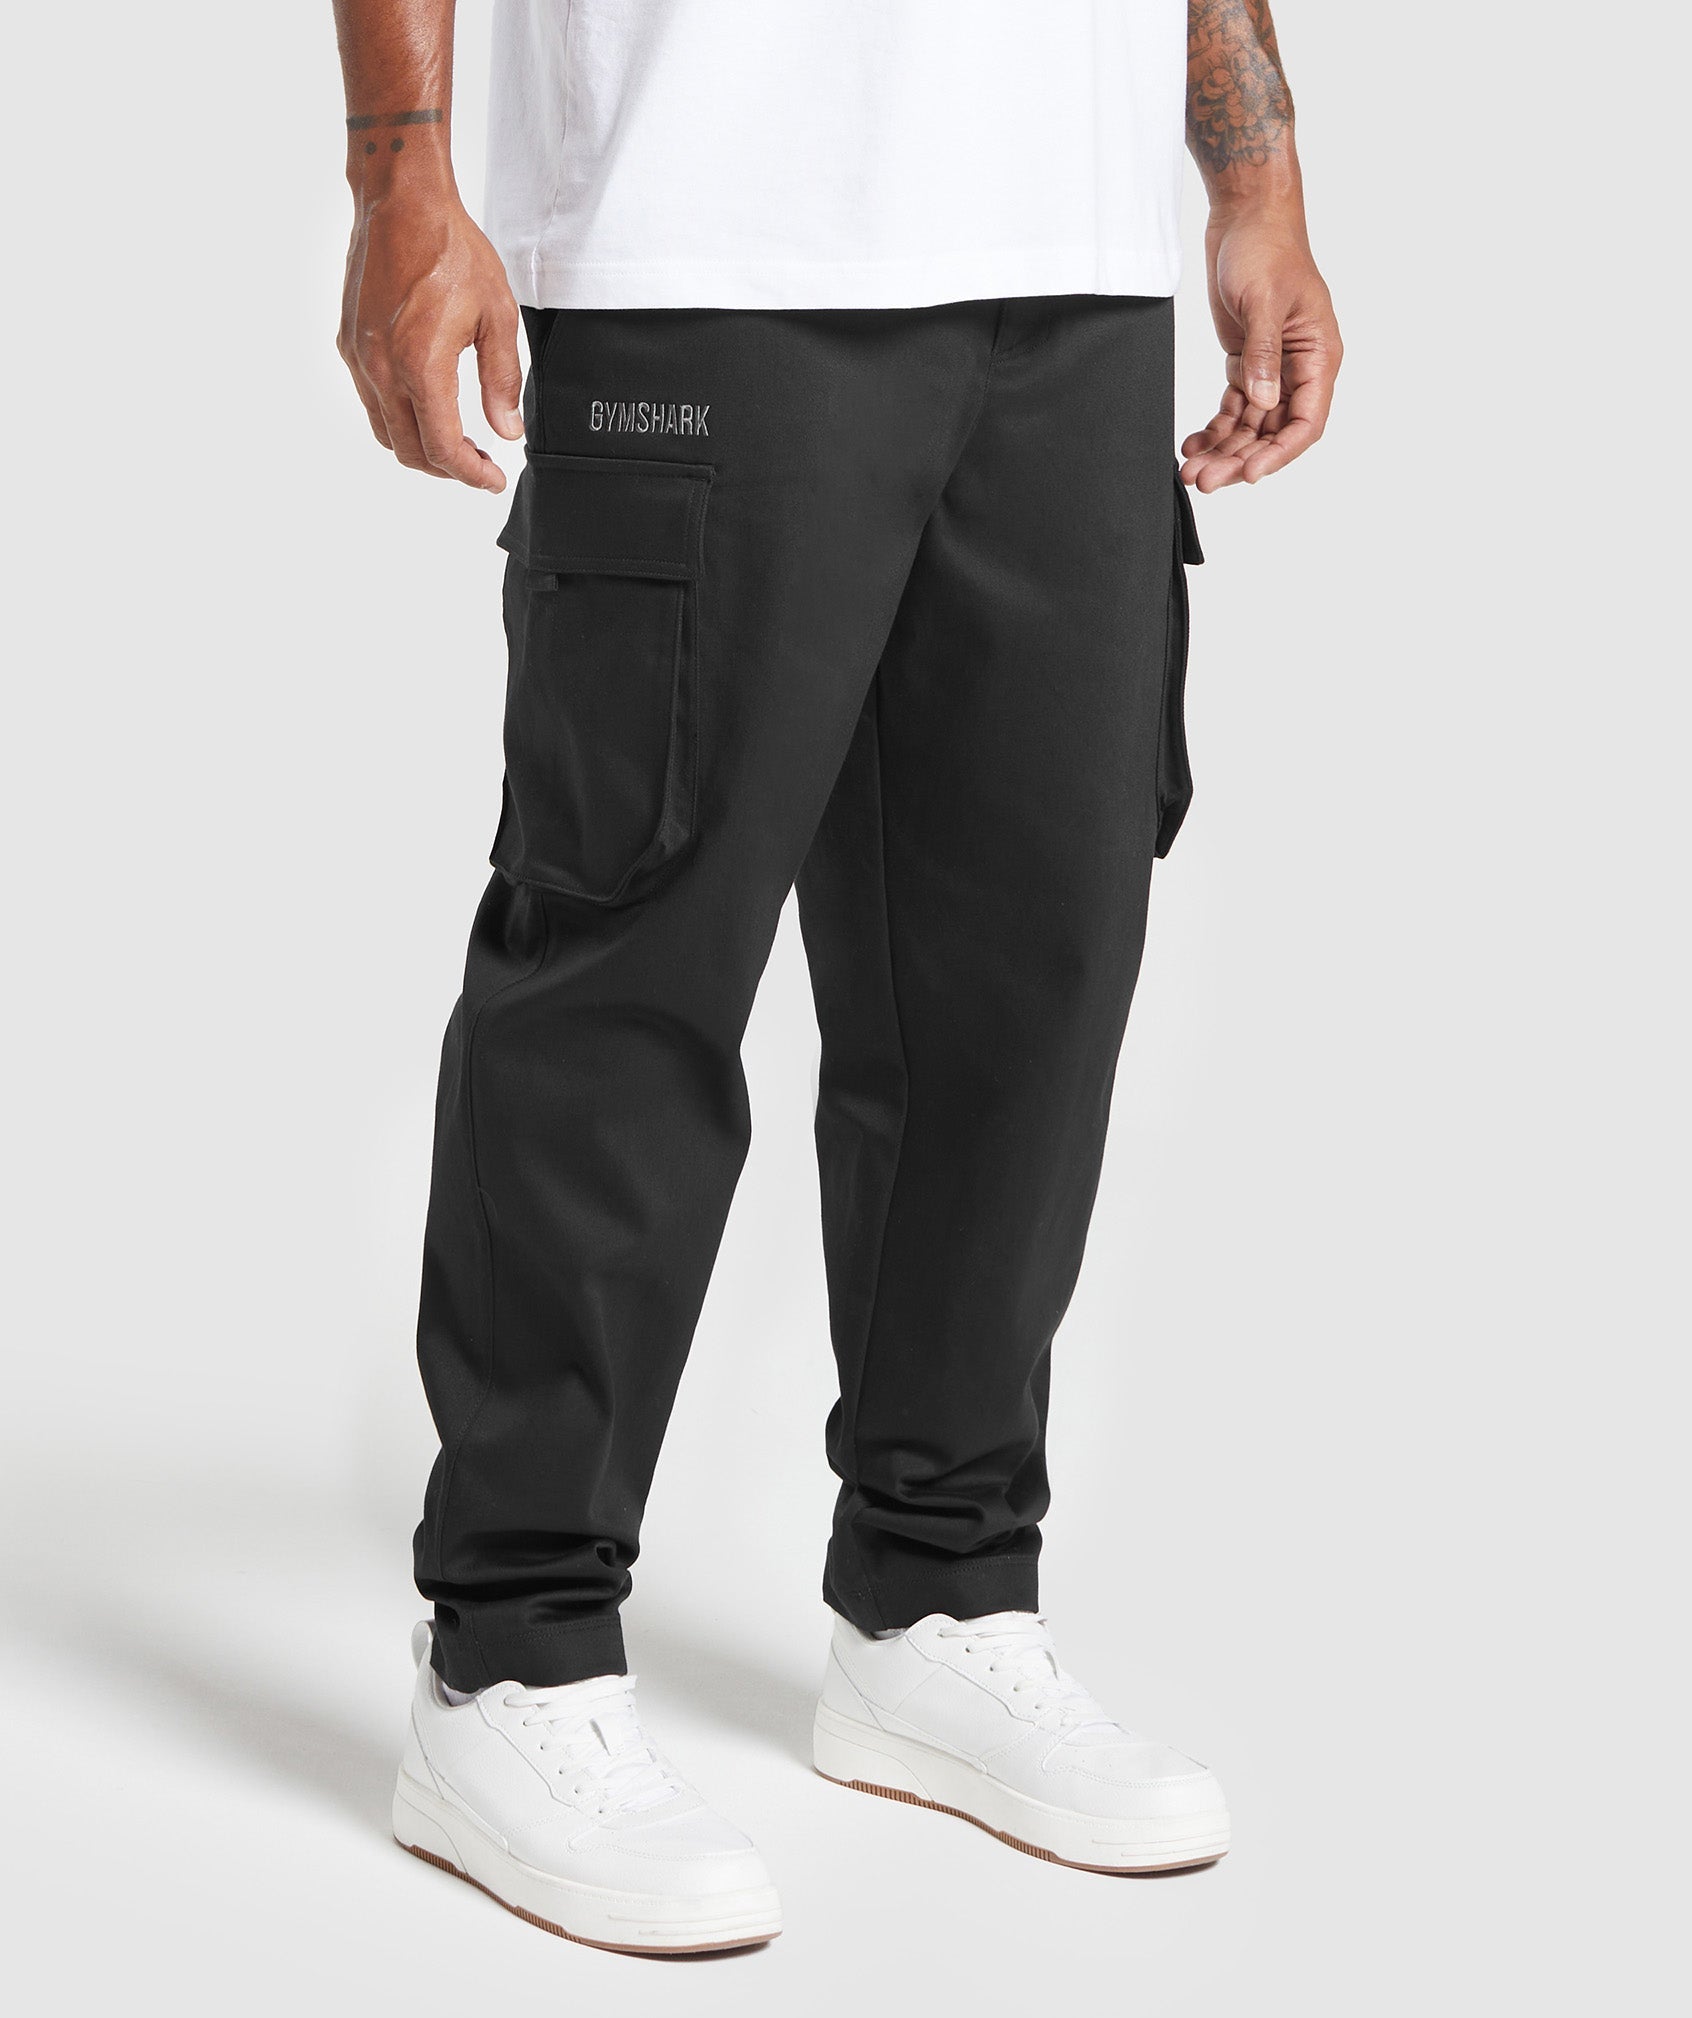 Rest Day Woven Cargo Pants in Black - view 1